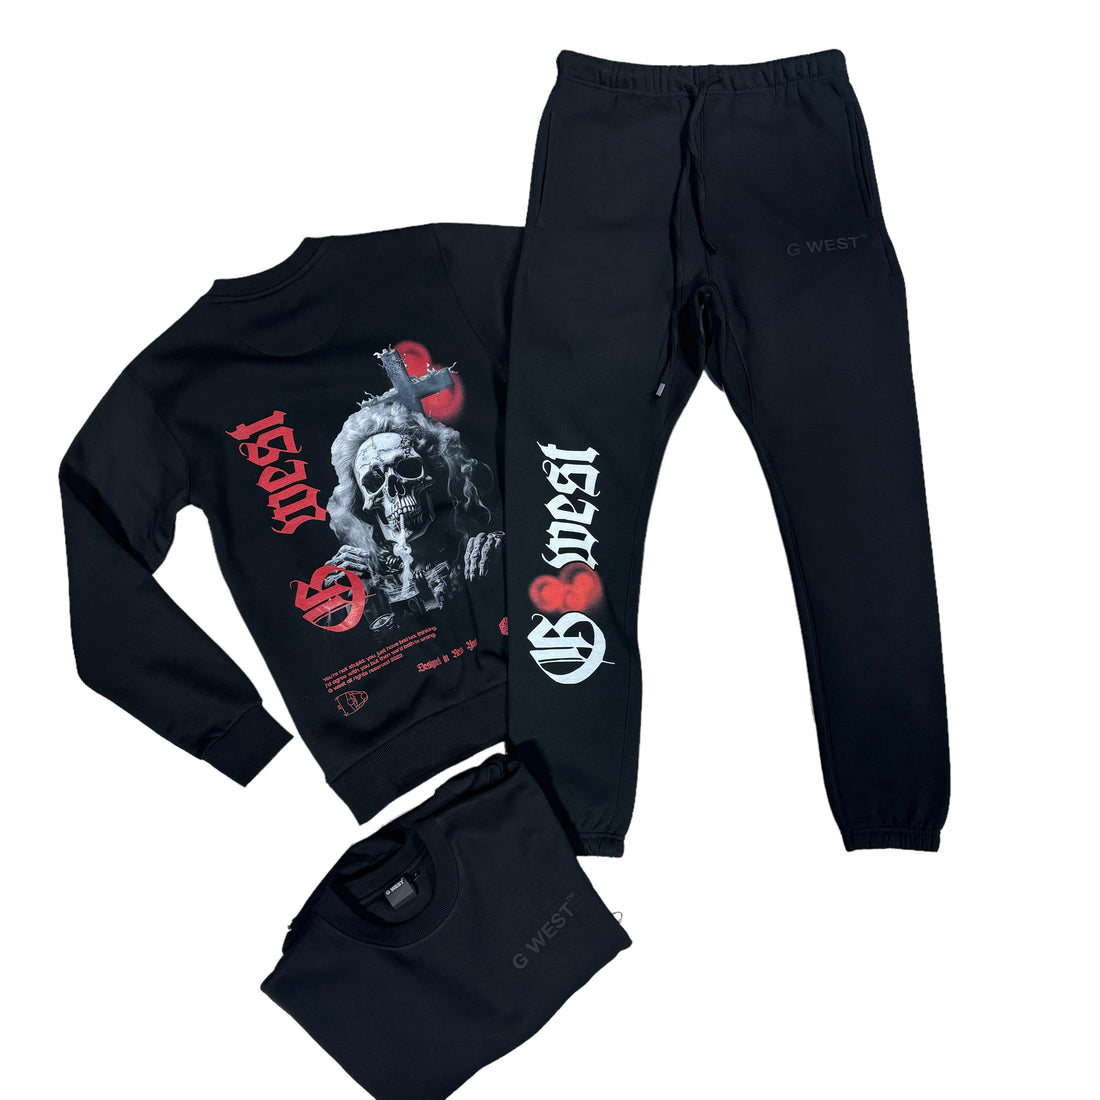 G West Smoke Skull Blk/Red Black Fleece Crewneck Jogging Suit With Invisible Zippers